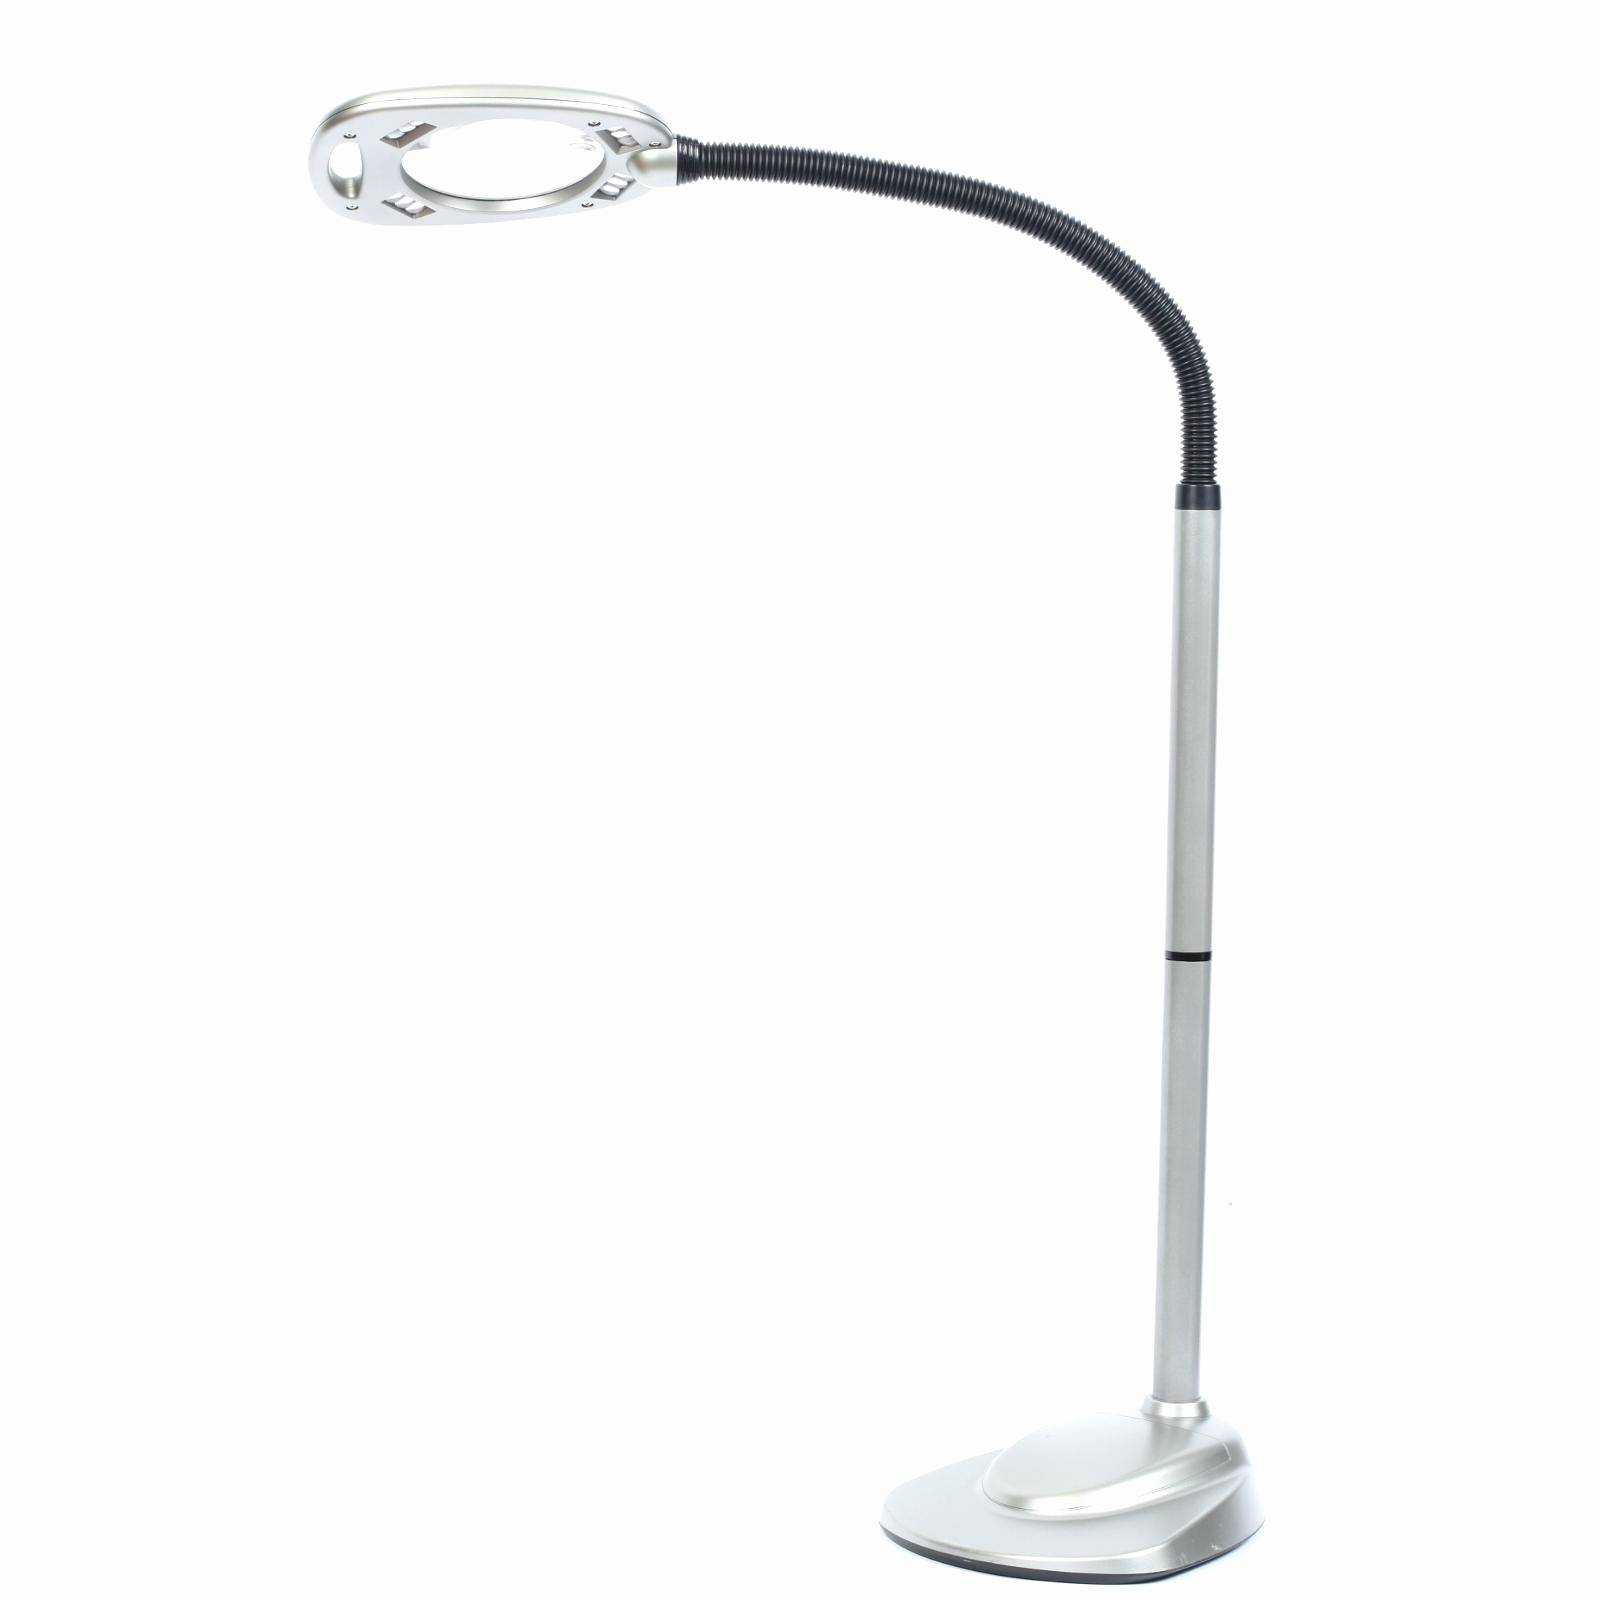 Attractive Daylight Floor Standing Lamp With Magnifier for size 1600 X 1600